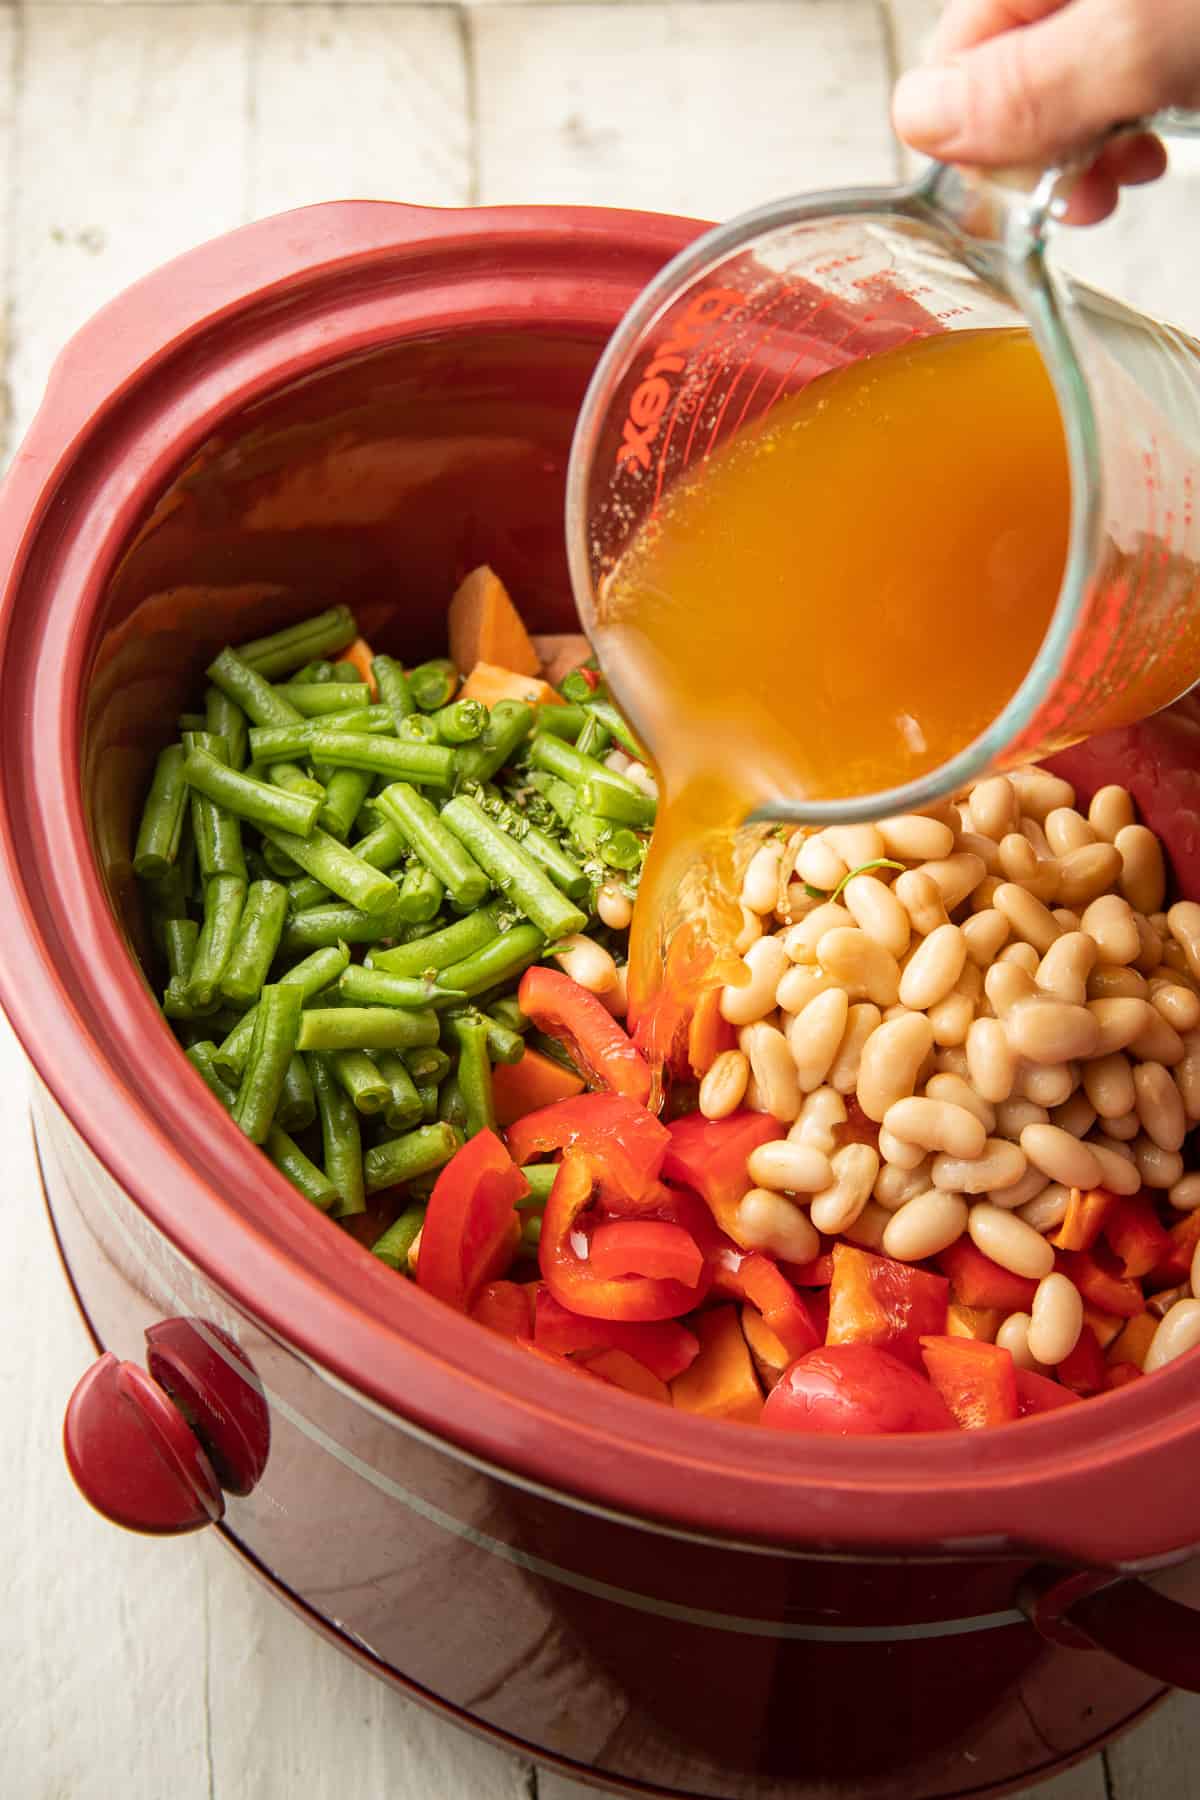 Hand pouring broth into a slow cooker filled with vegetables and beans.